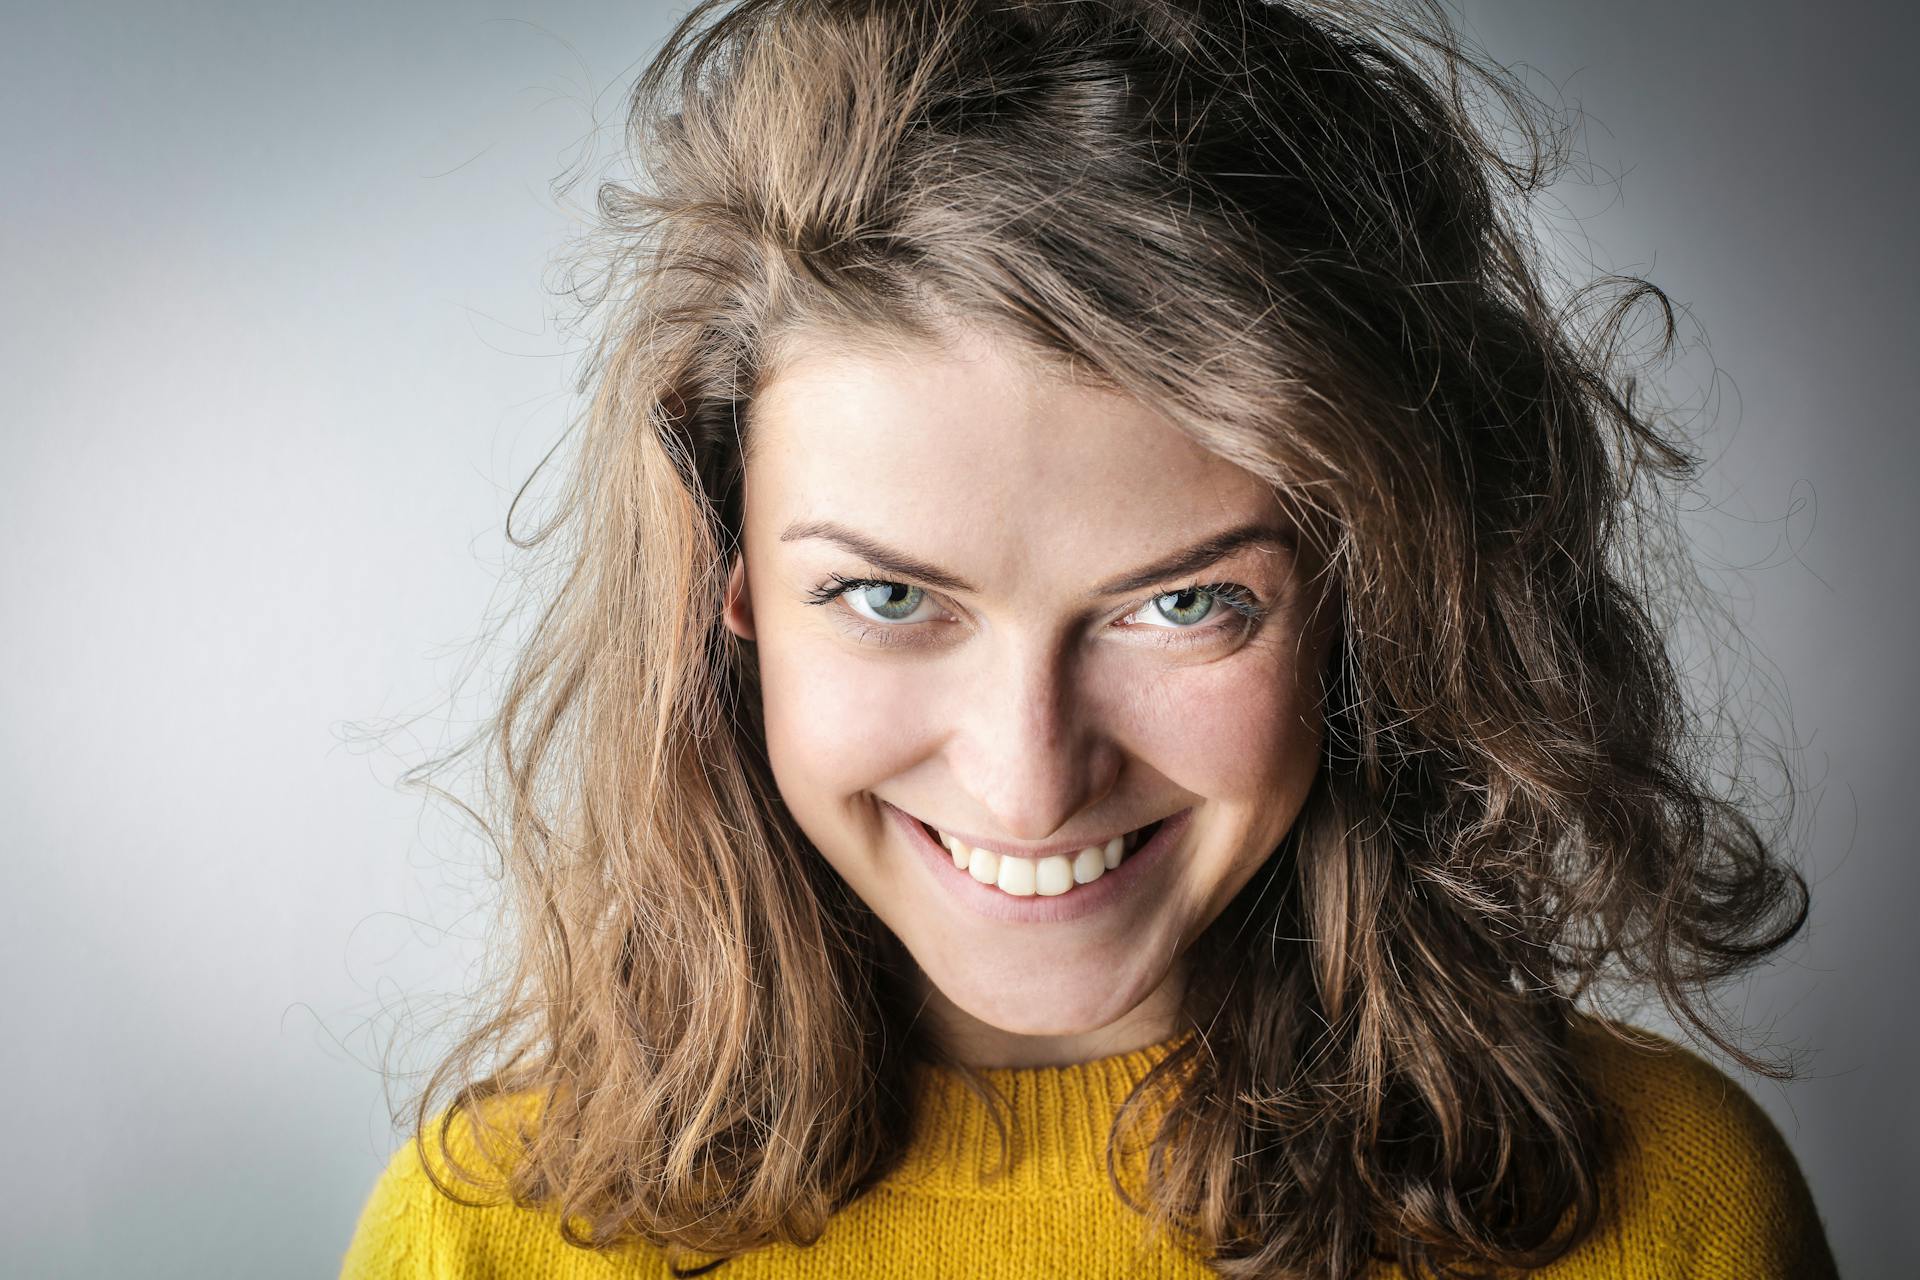 Woman grinning maniacally | Source: Pexels